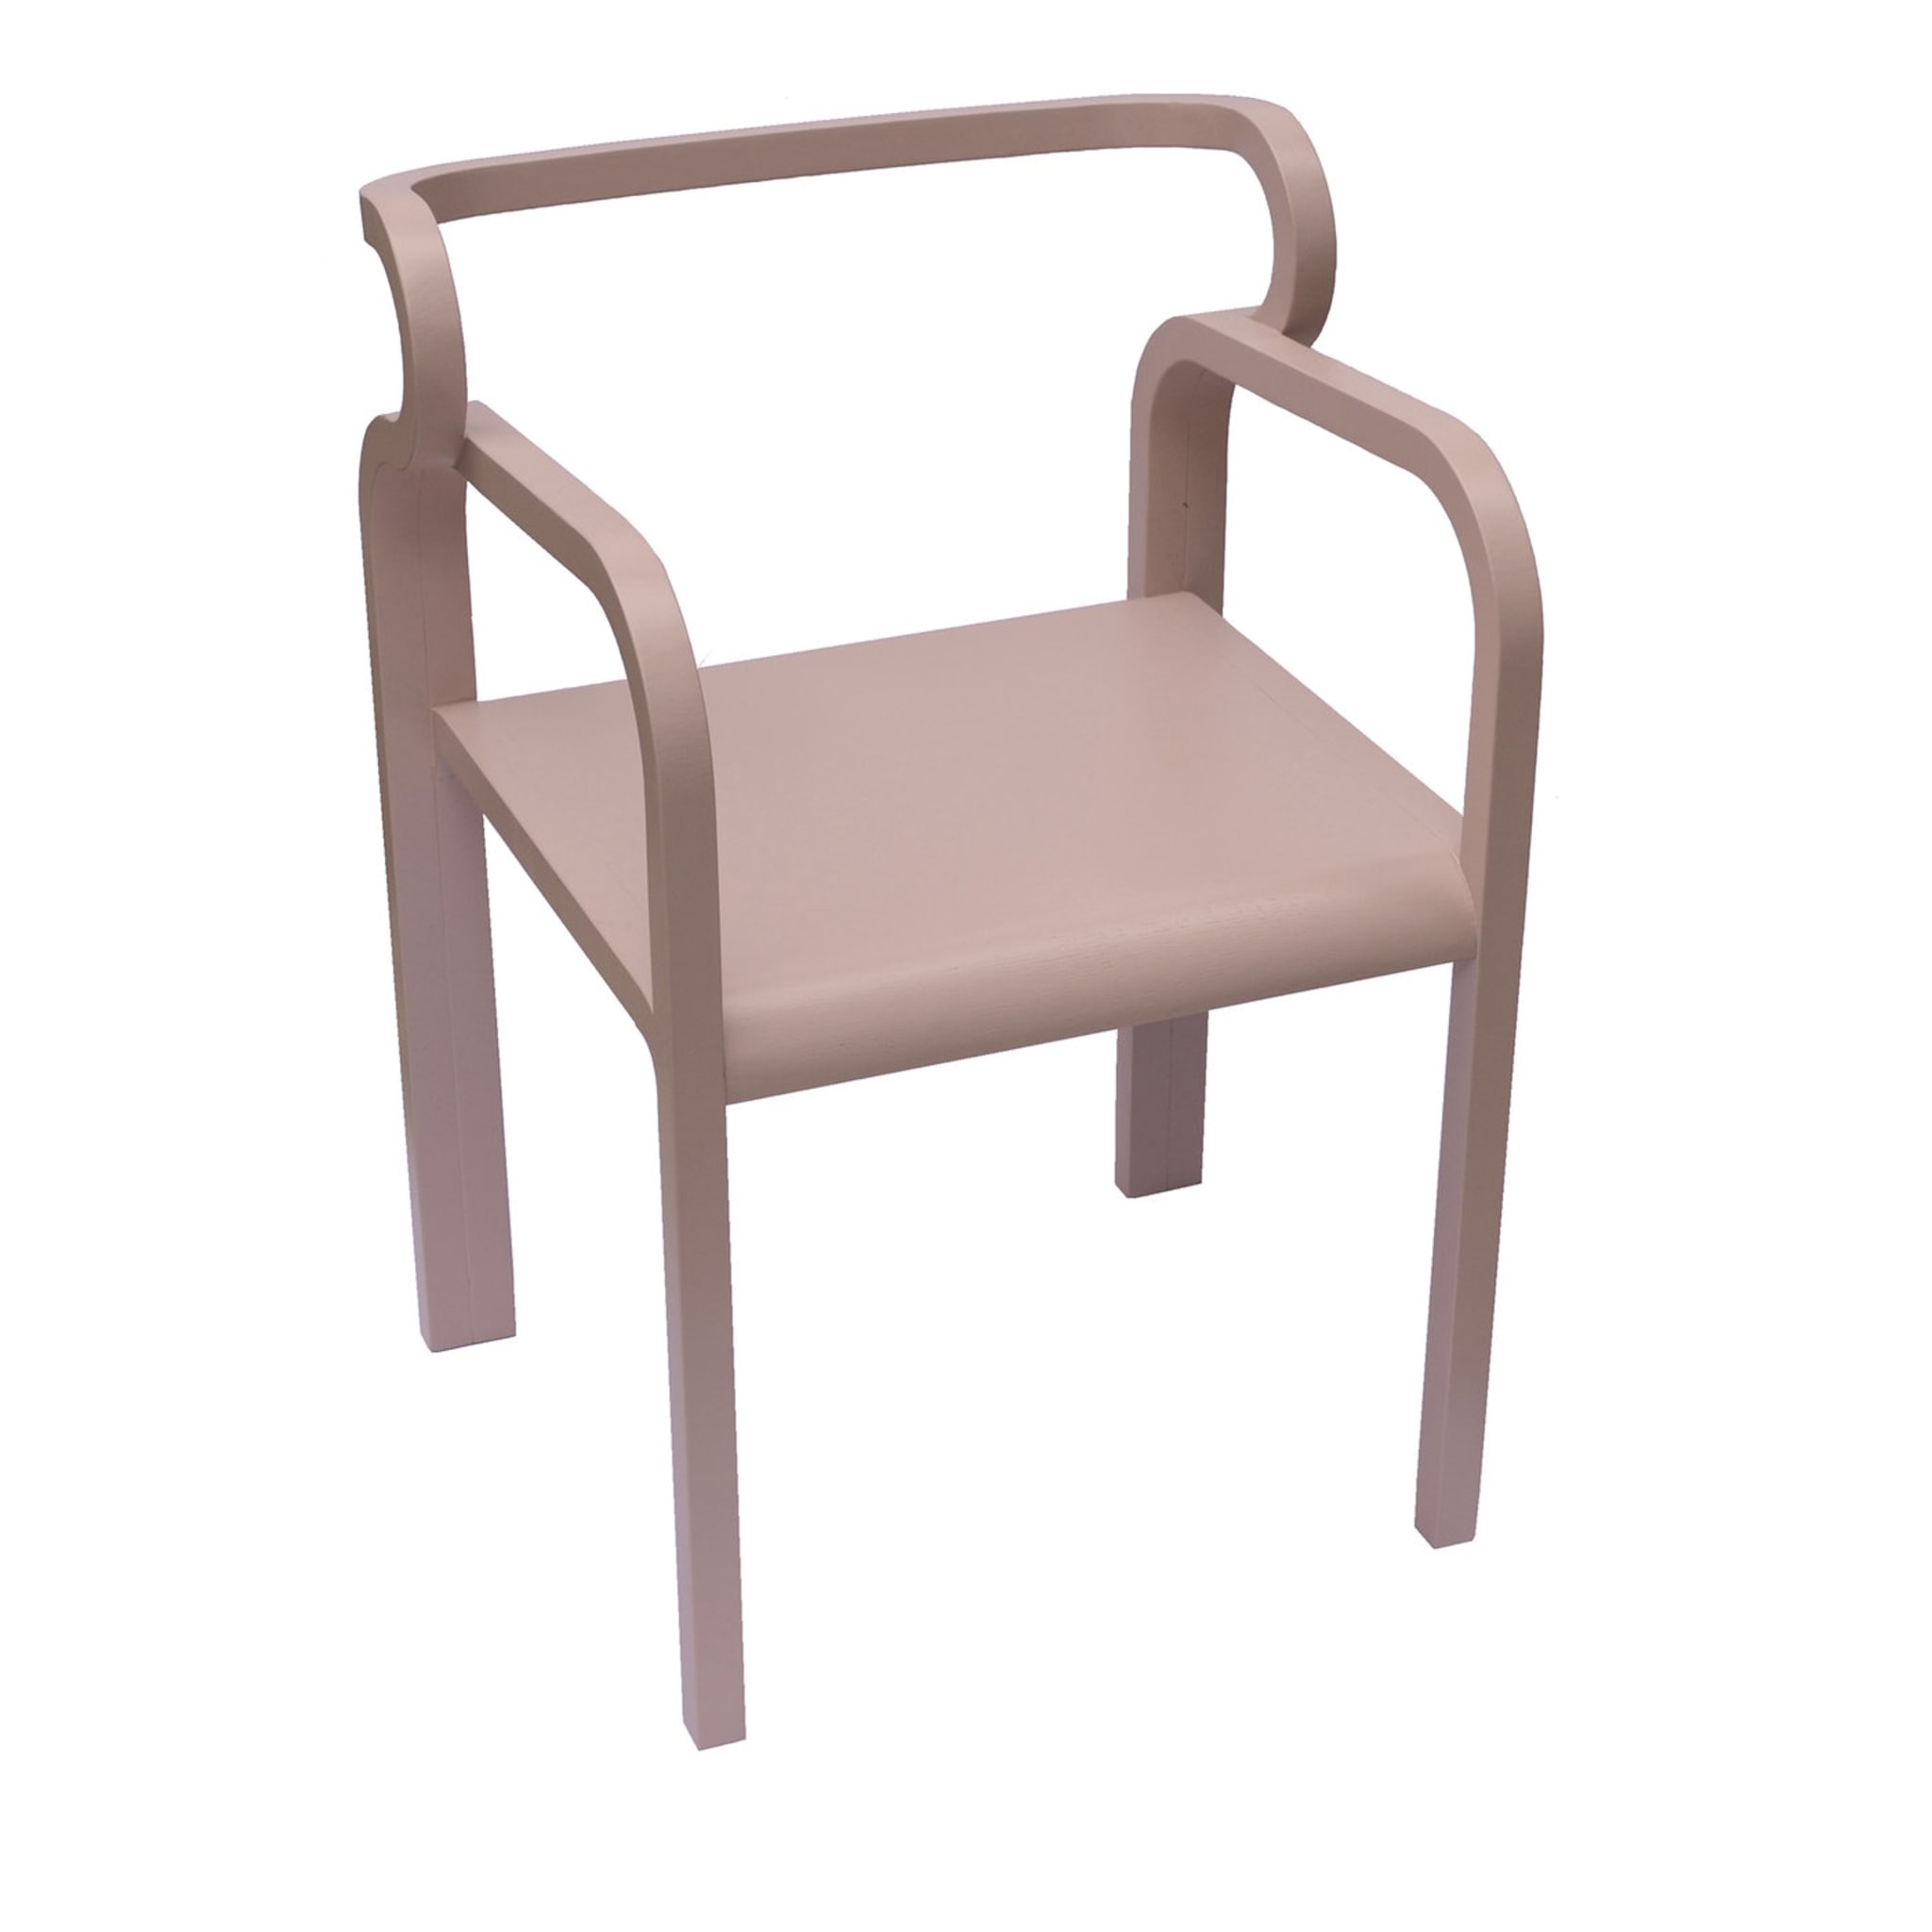 Odette Chair - Main view